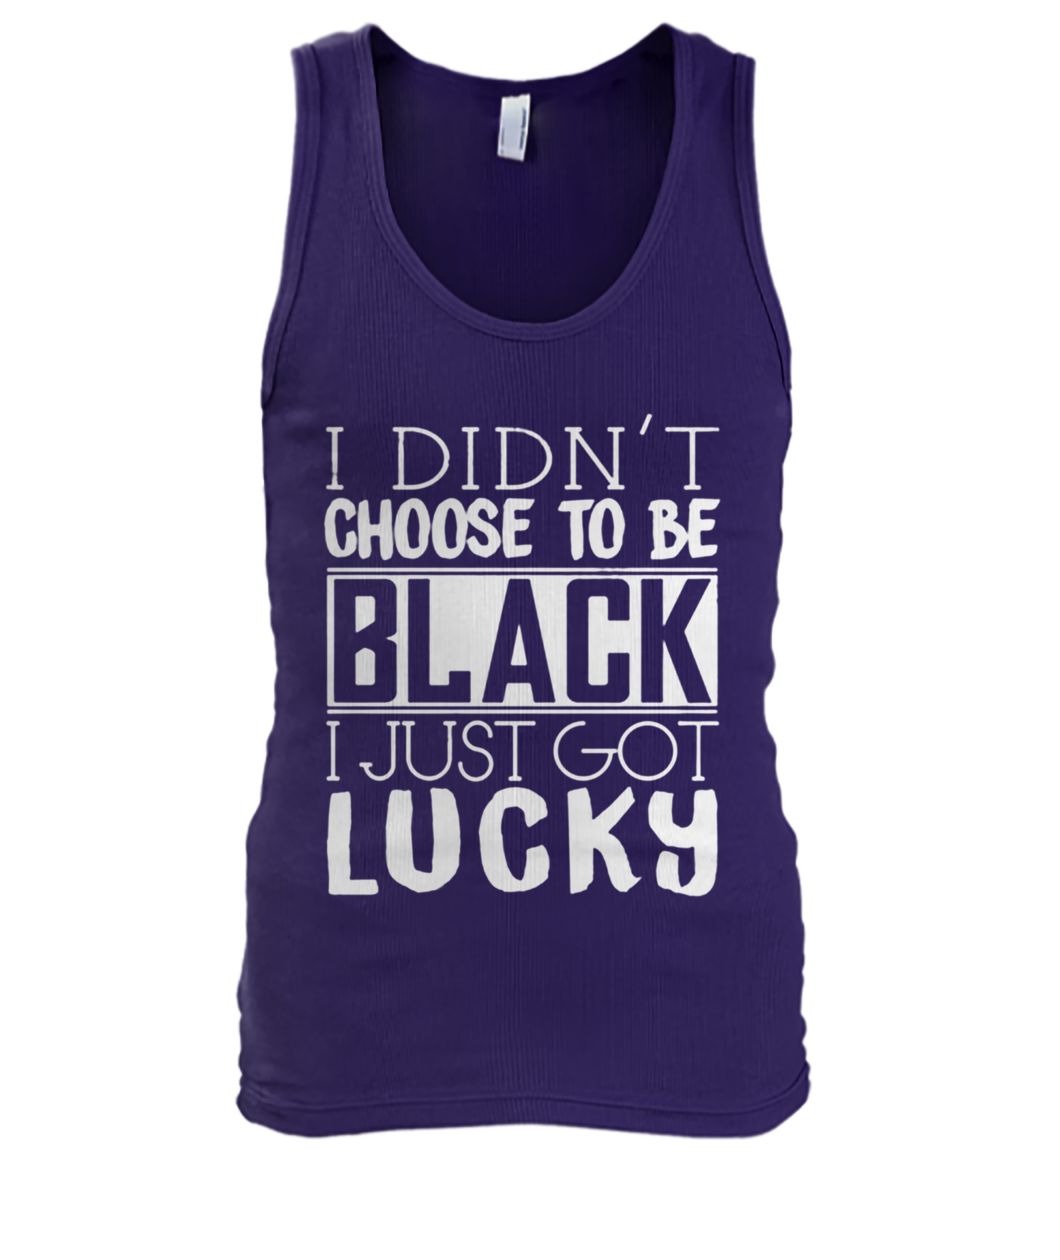 I didn't choose to be black I just got lucky men's tank top